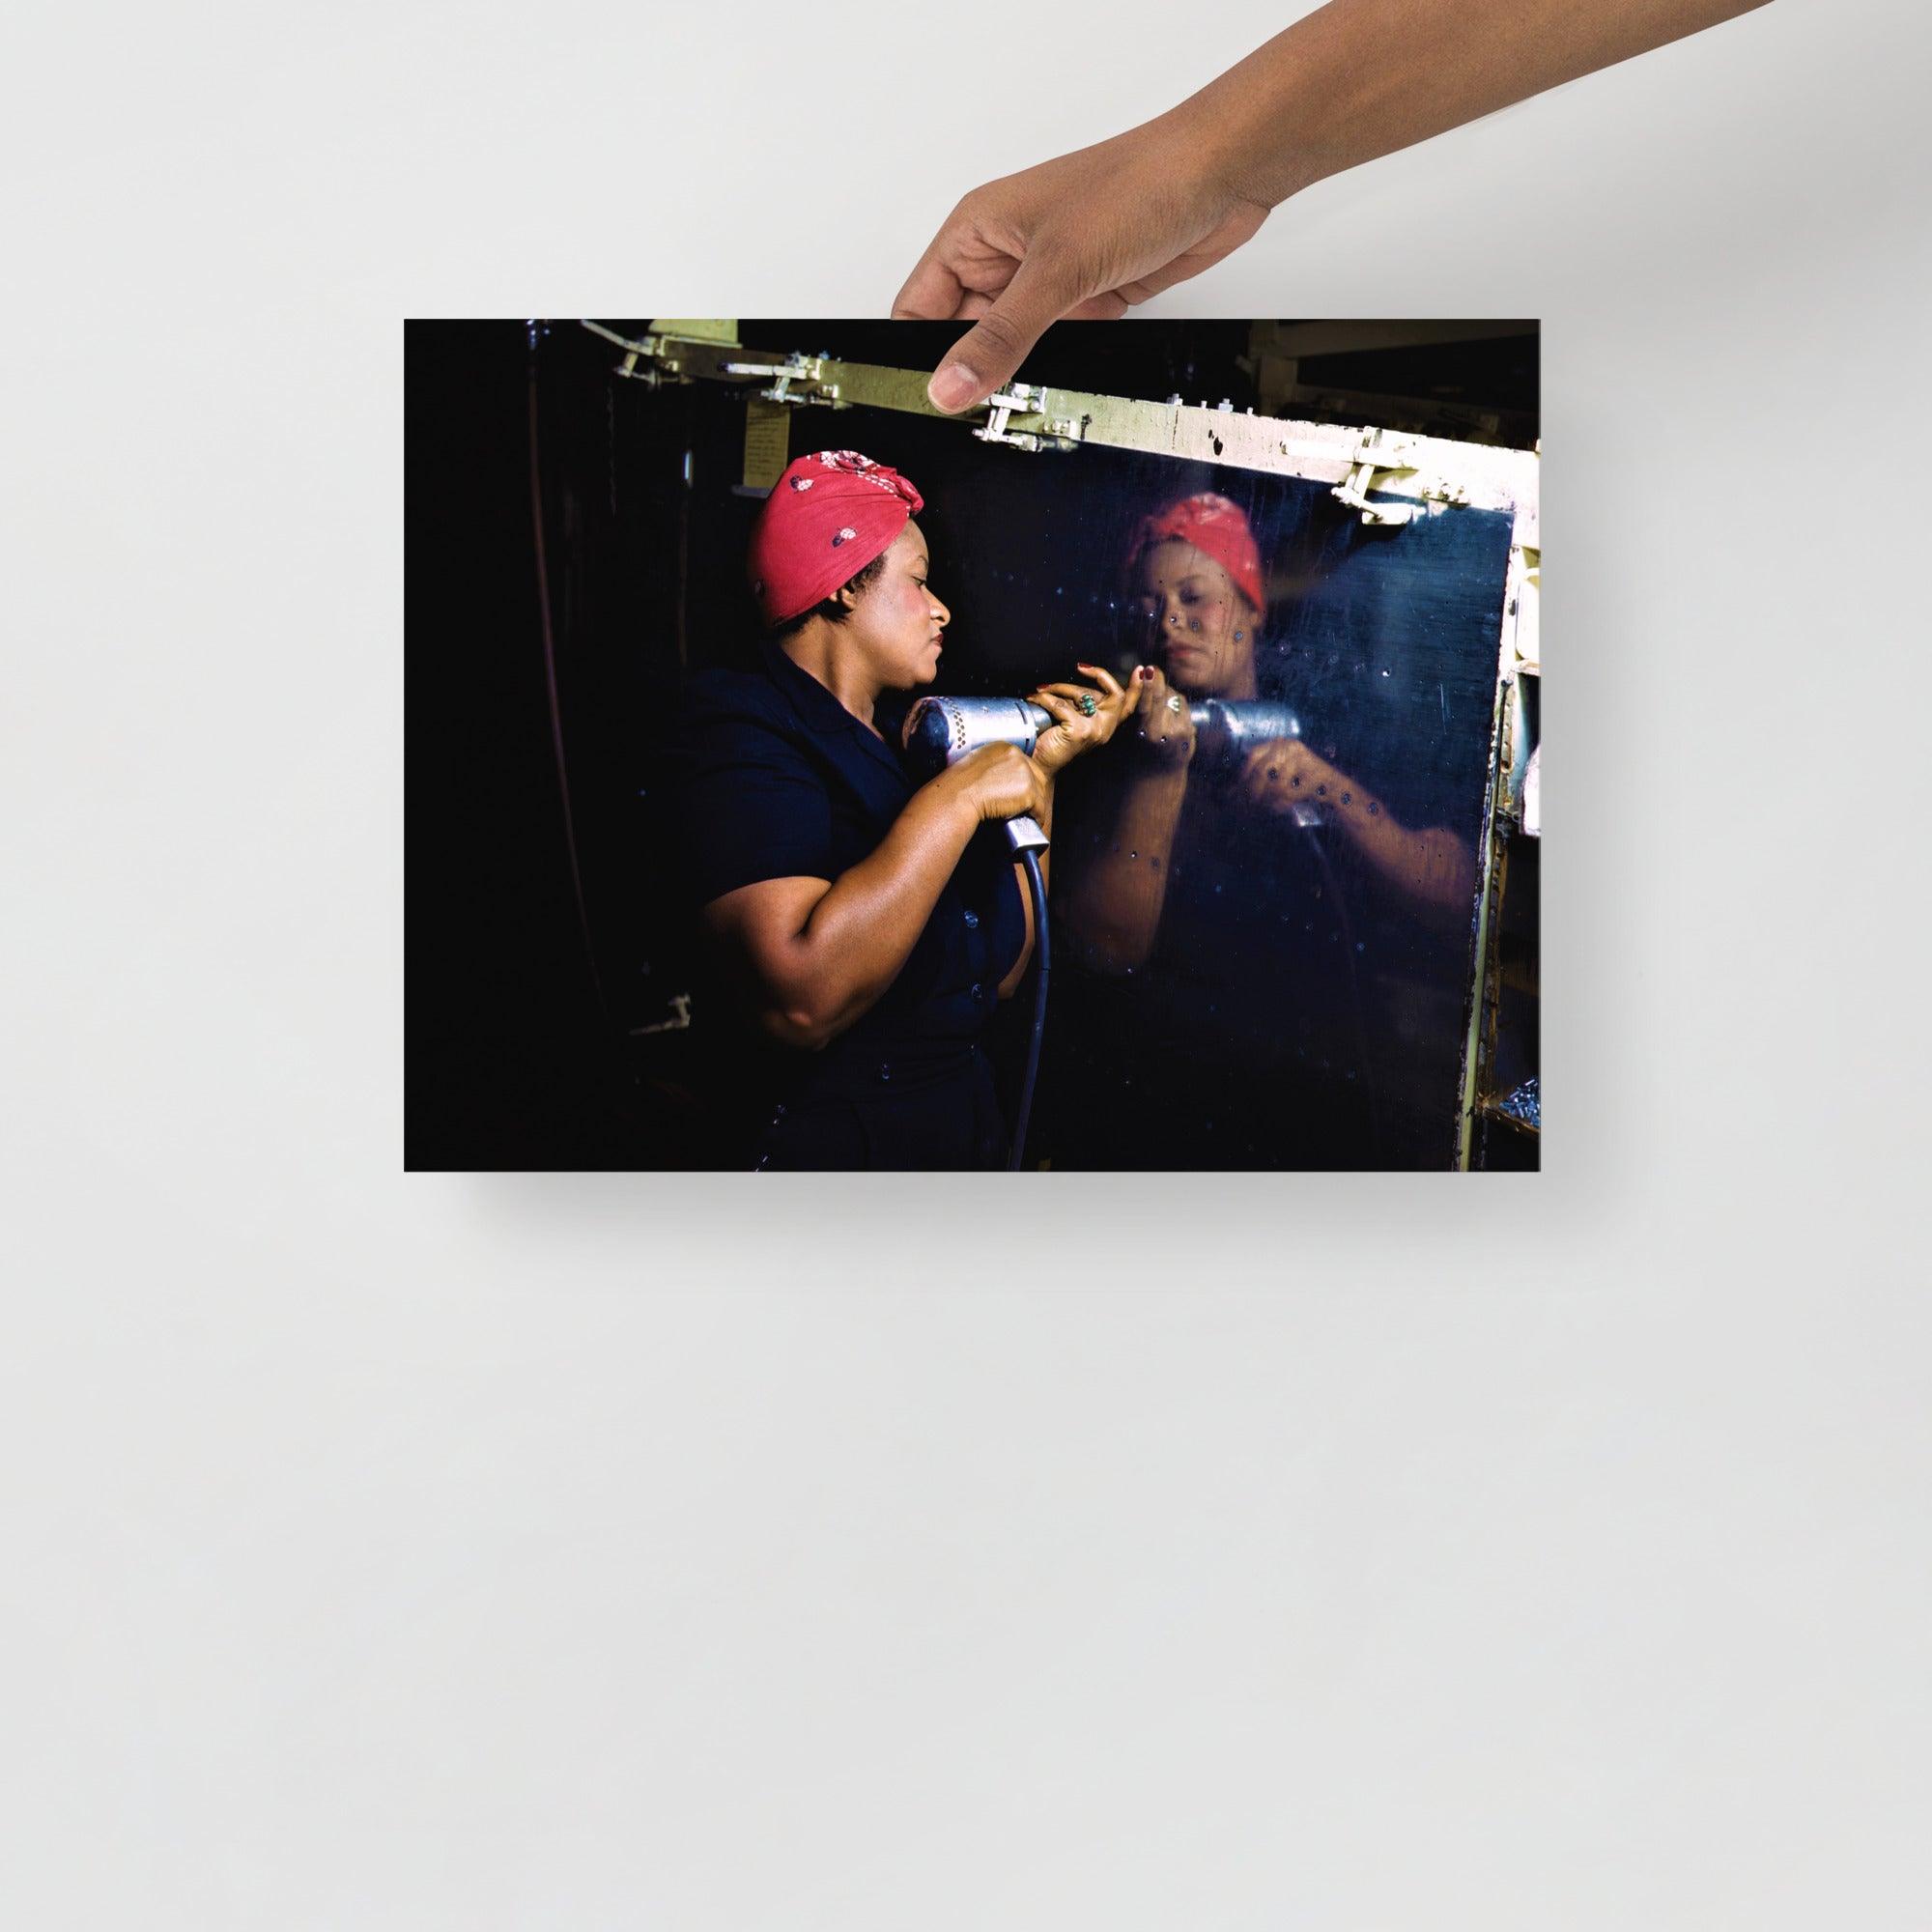 A Rosie the Riveter poster on a plain backdrop in size 12x16”.